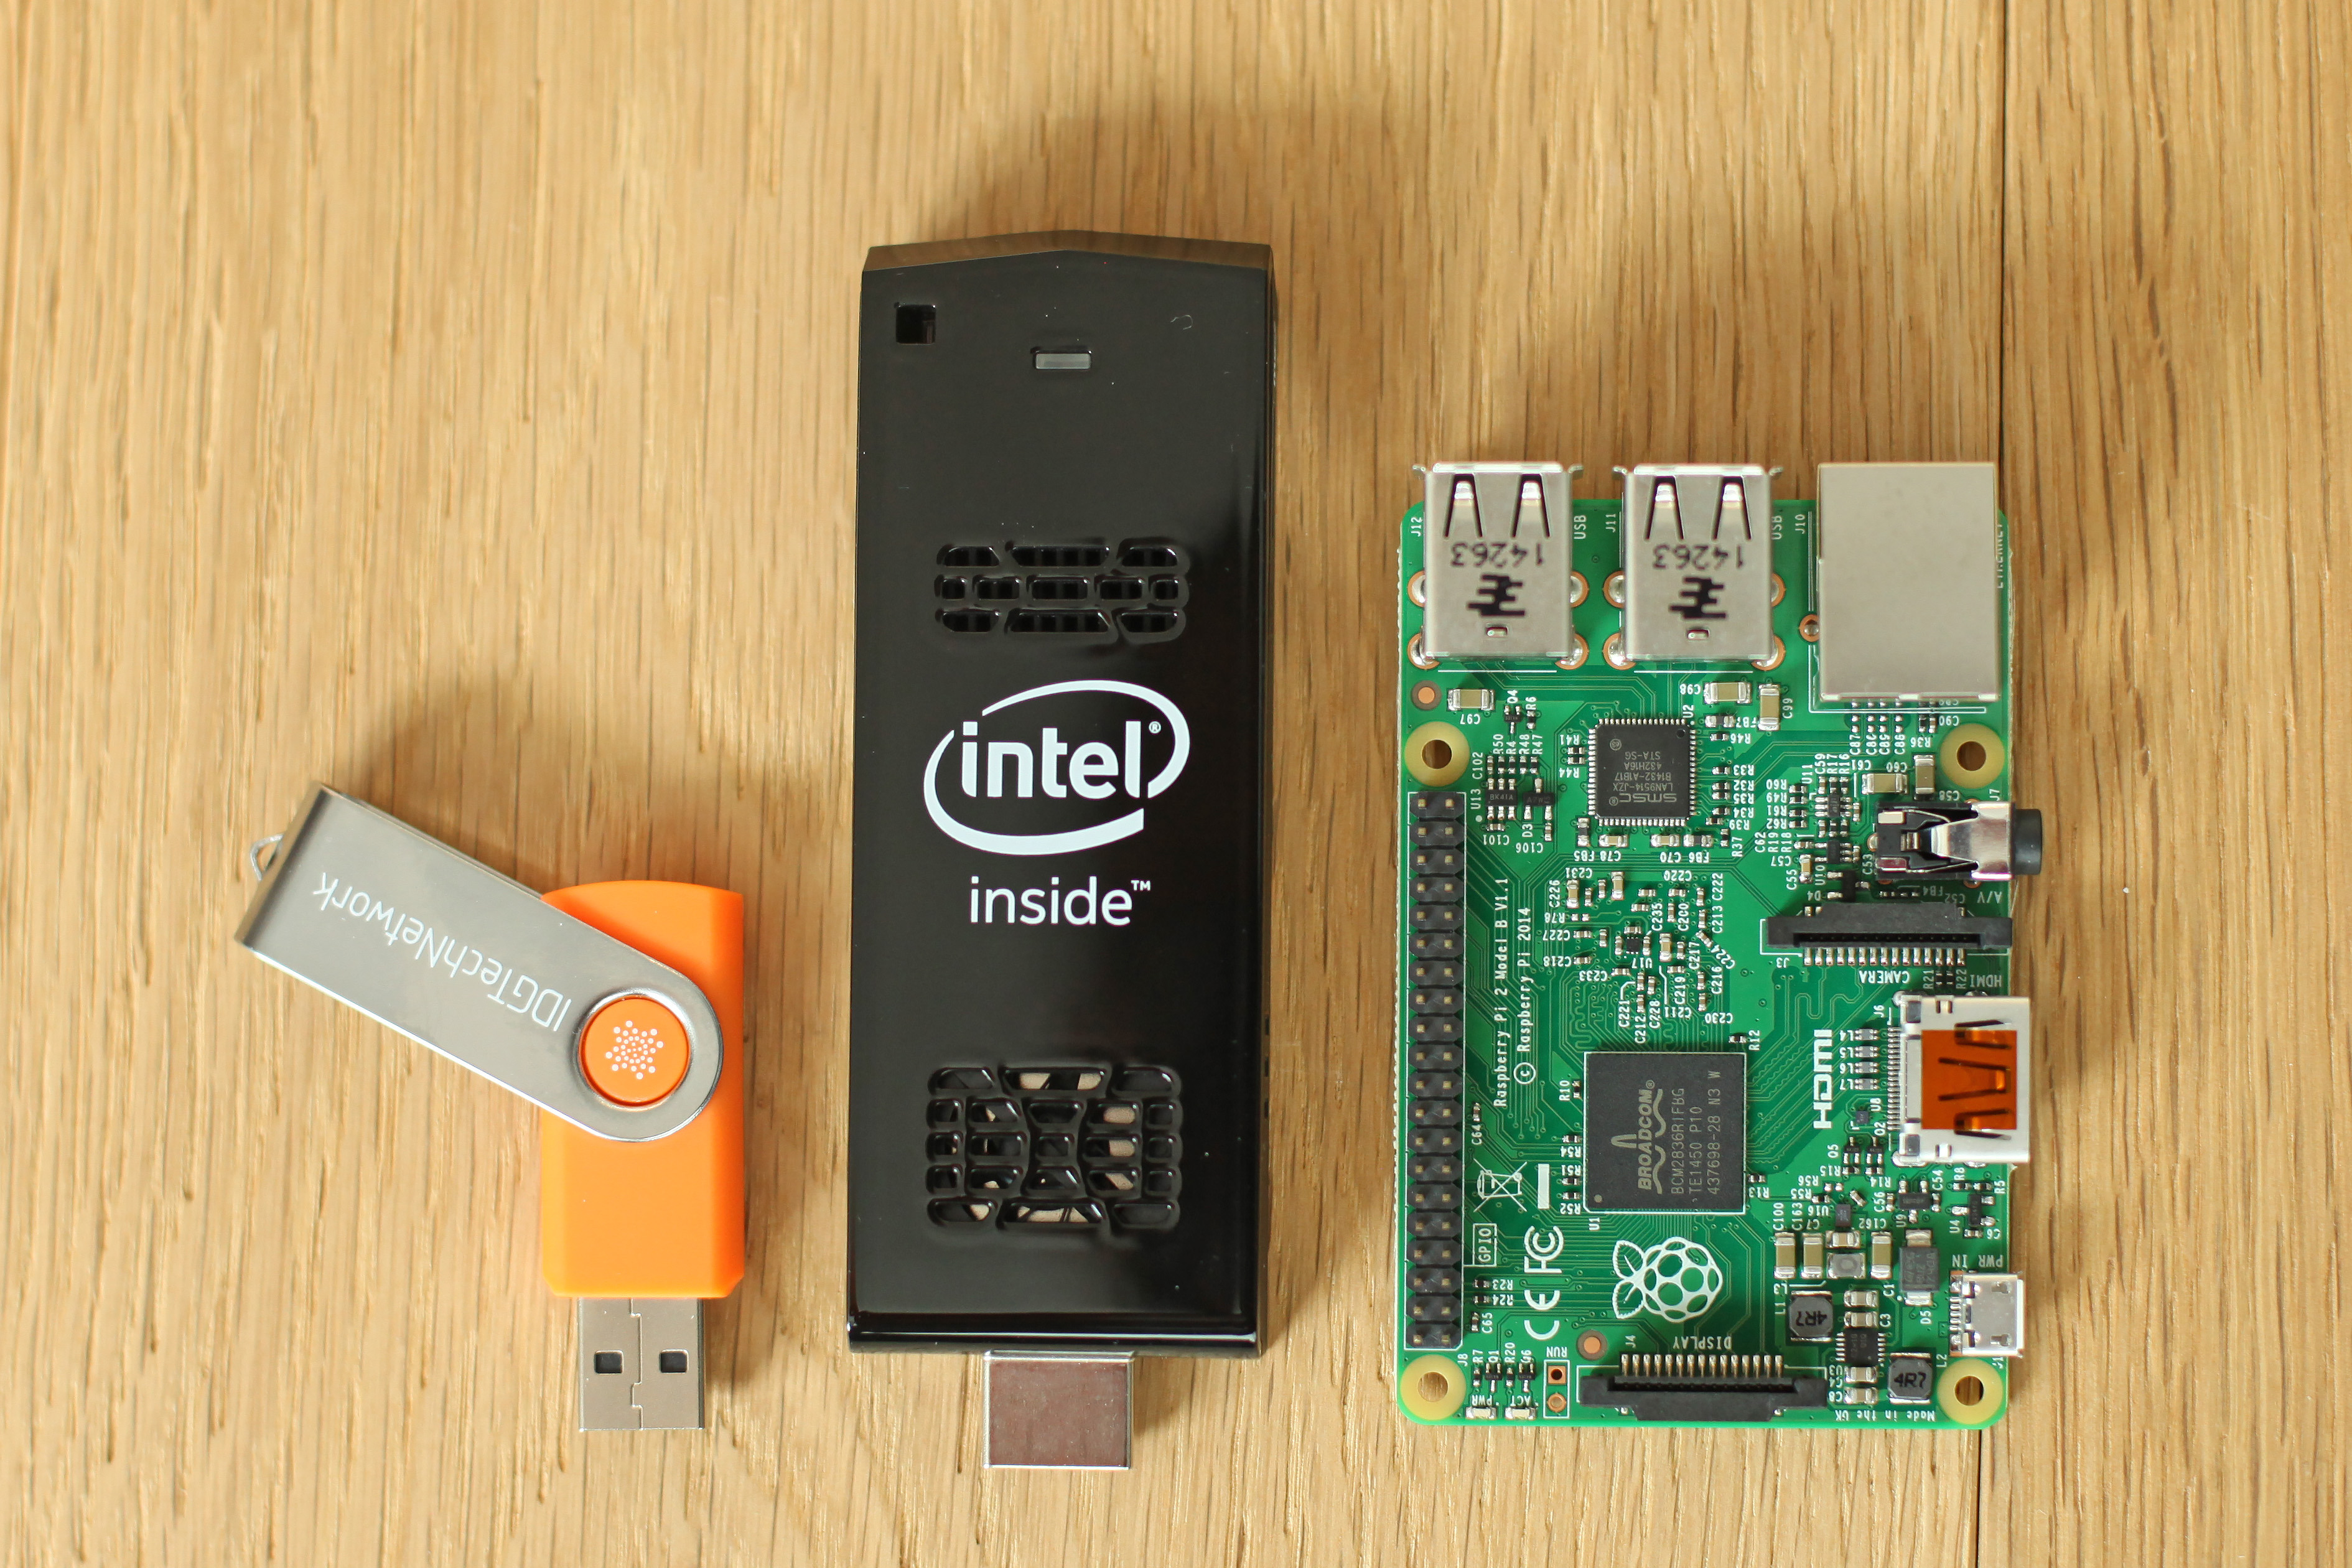 Intel's tiny Compute Stick PC could pack a bigger punch this winter ...